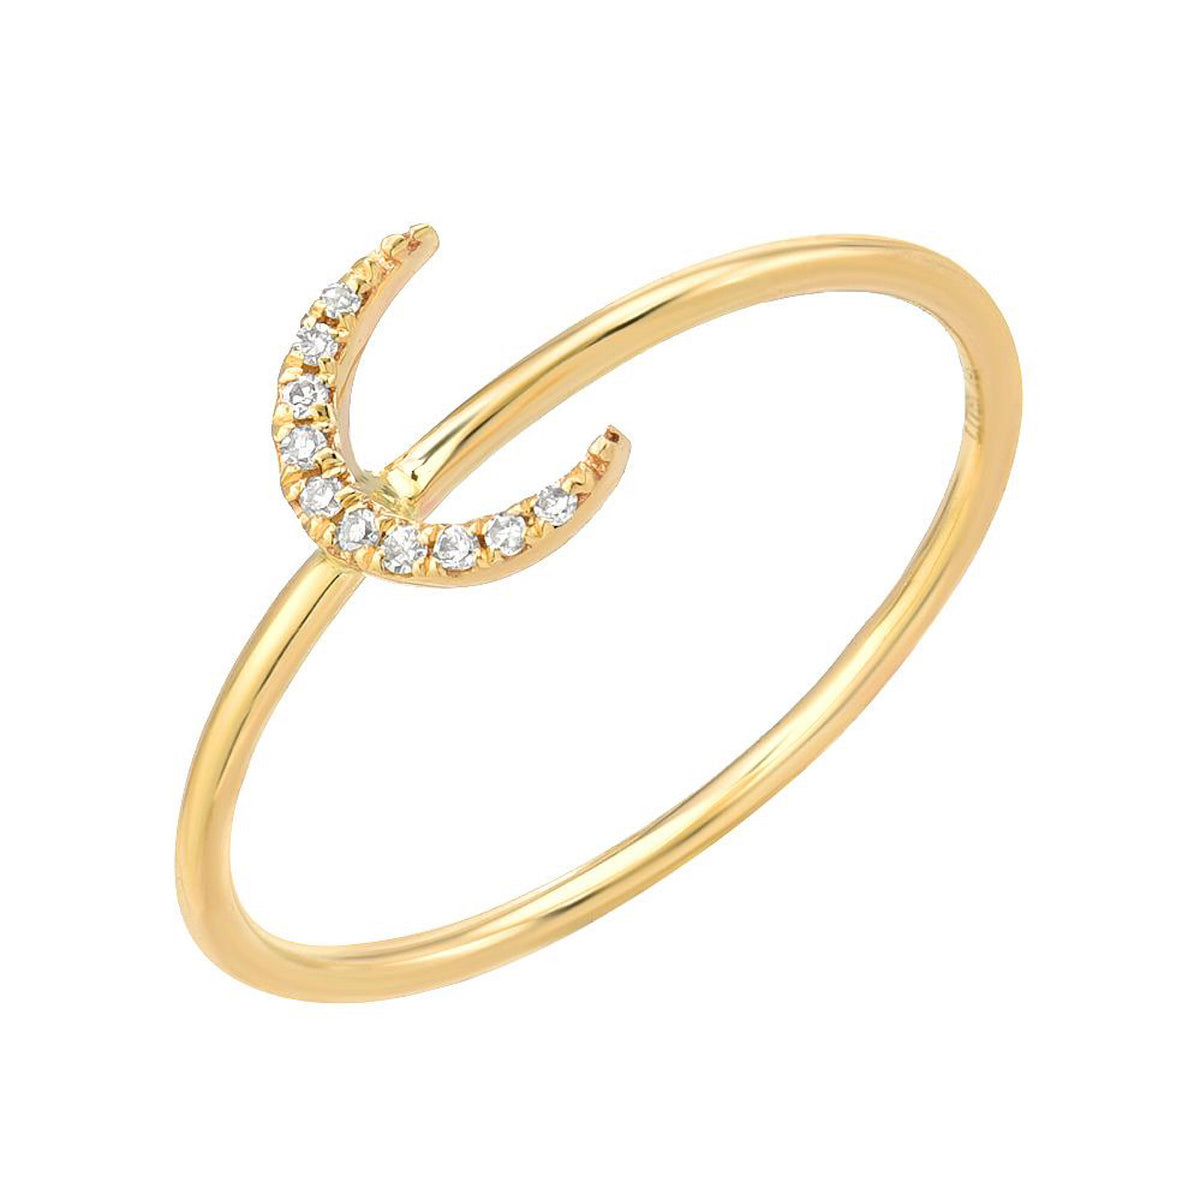 Petite Crescent Moon Stackable Ring